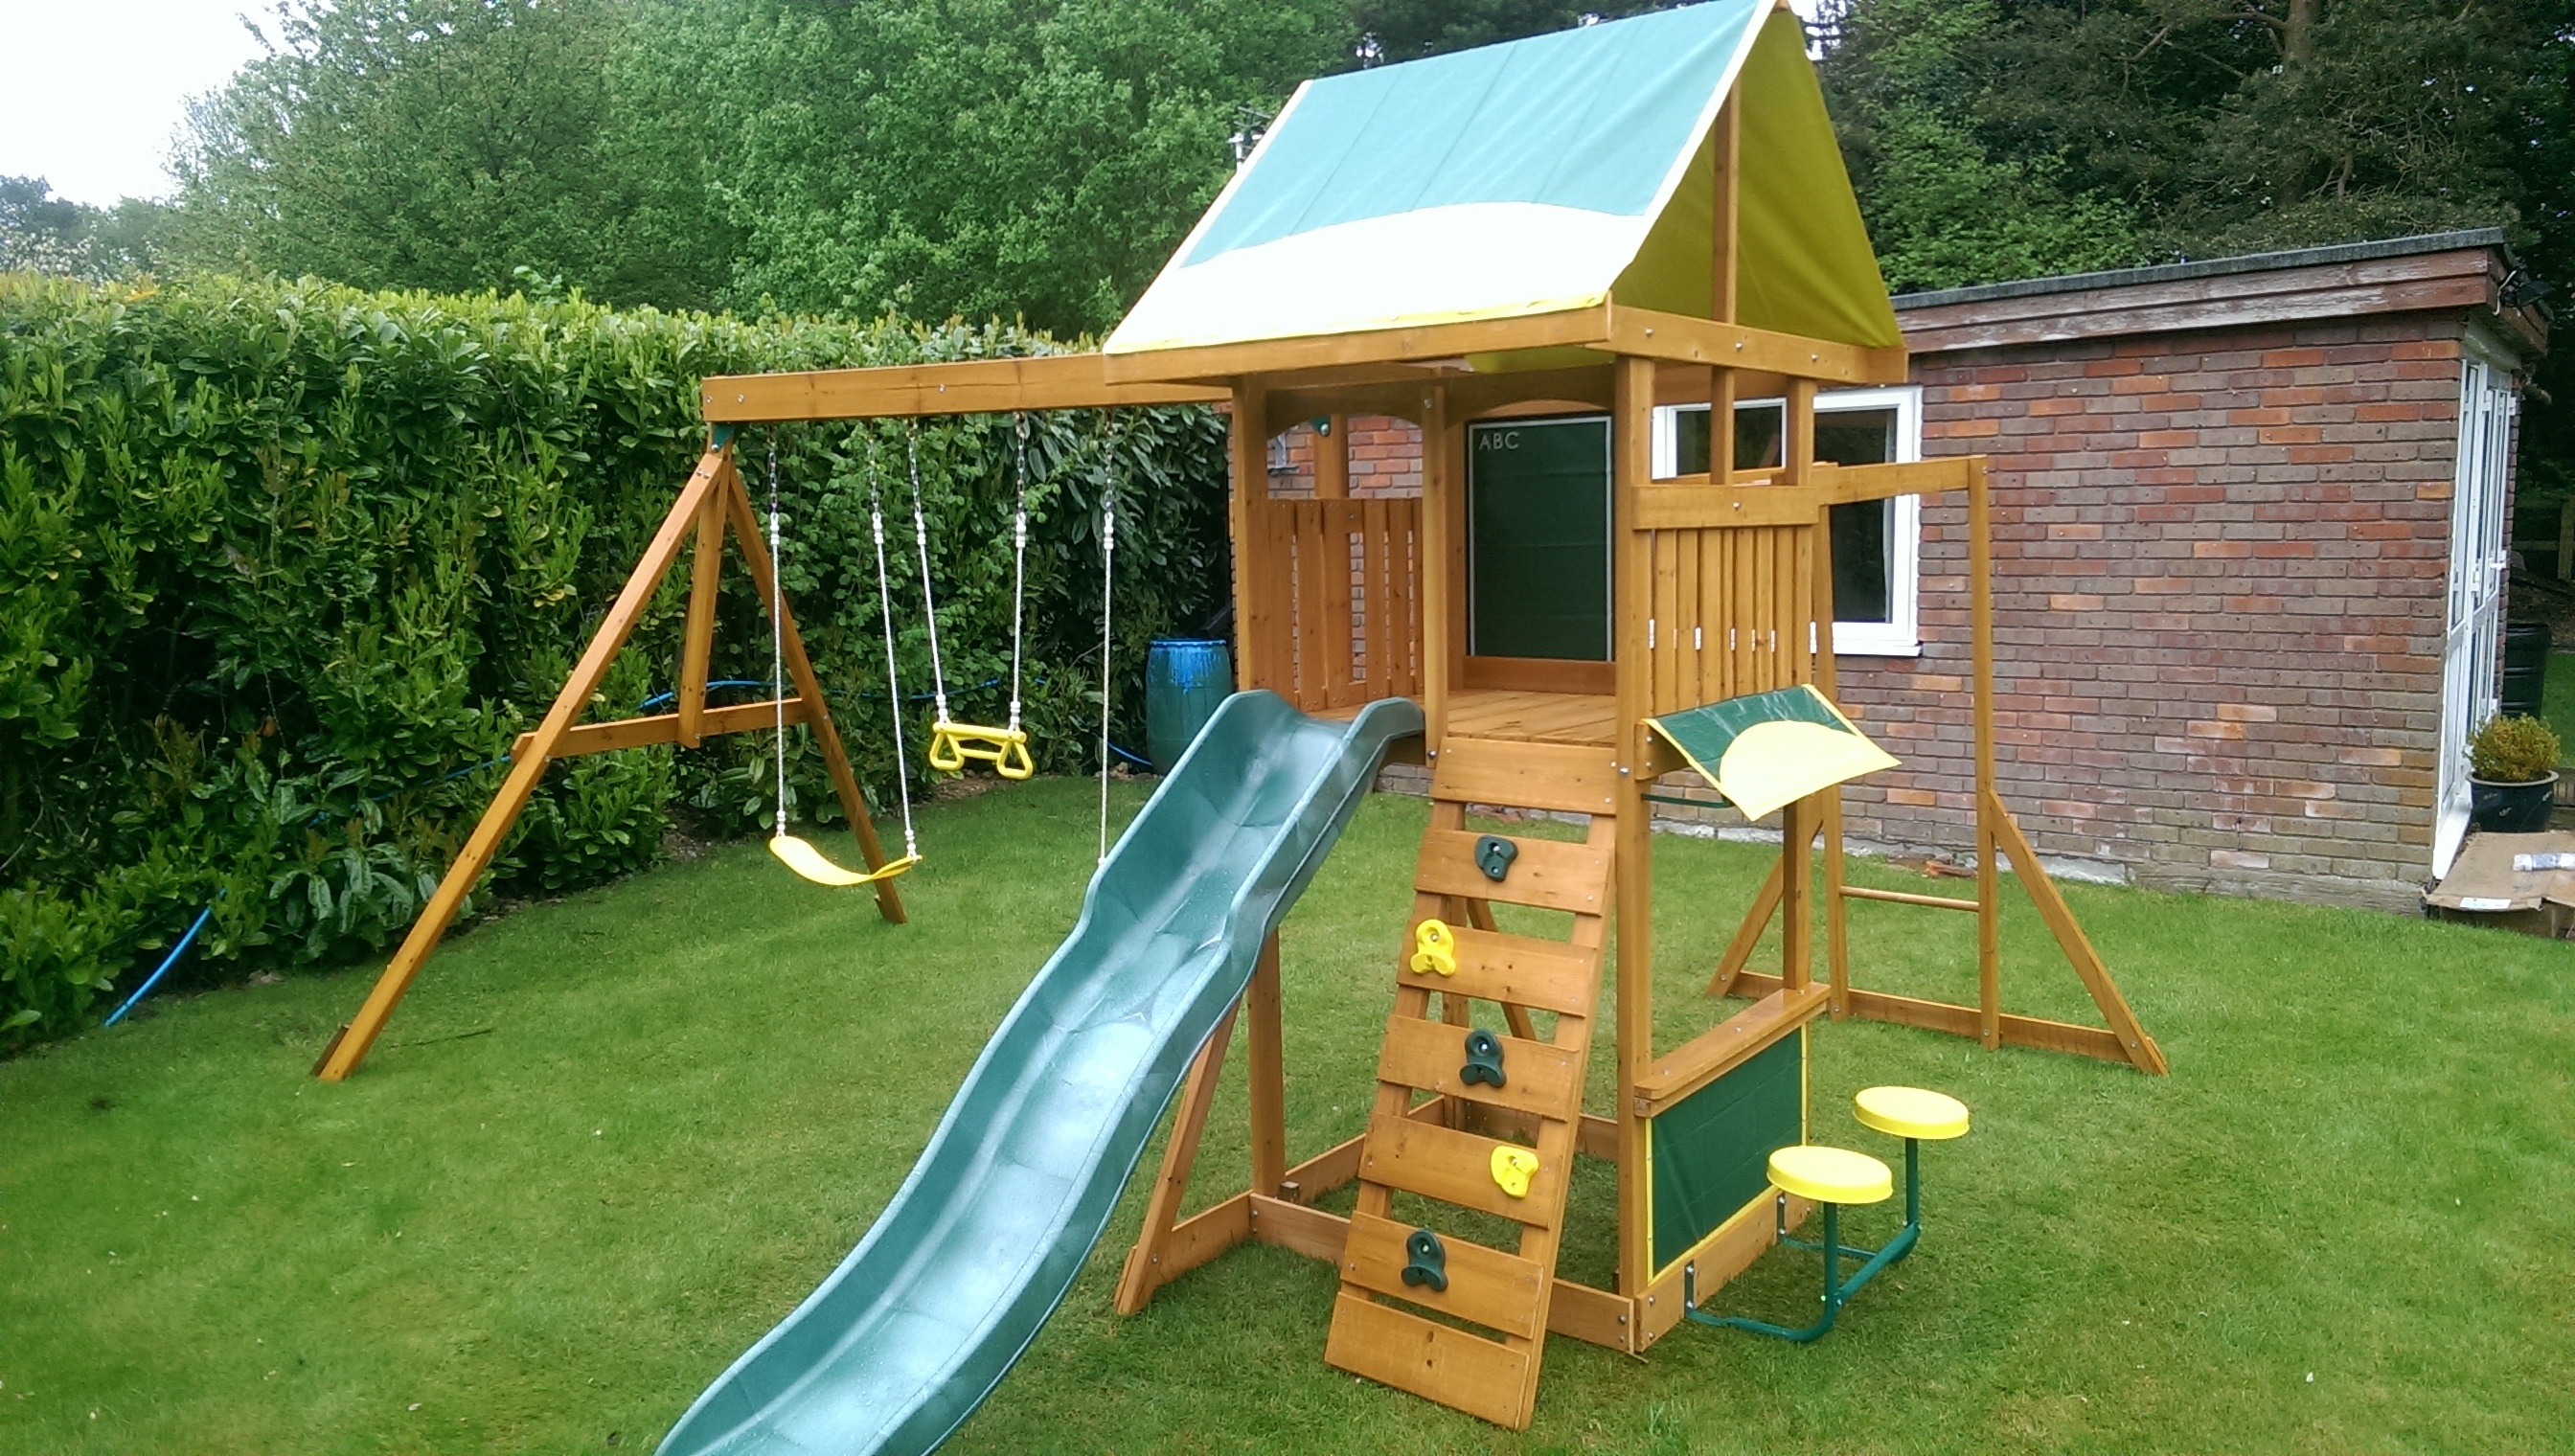 The Brightside Climbing Frame from Selwood